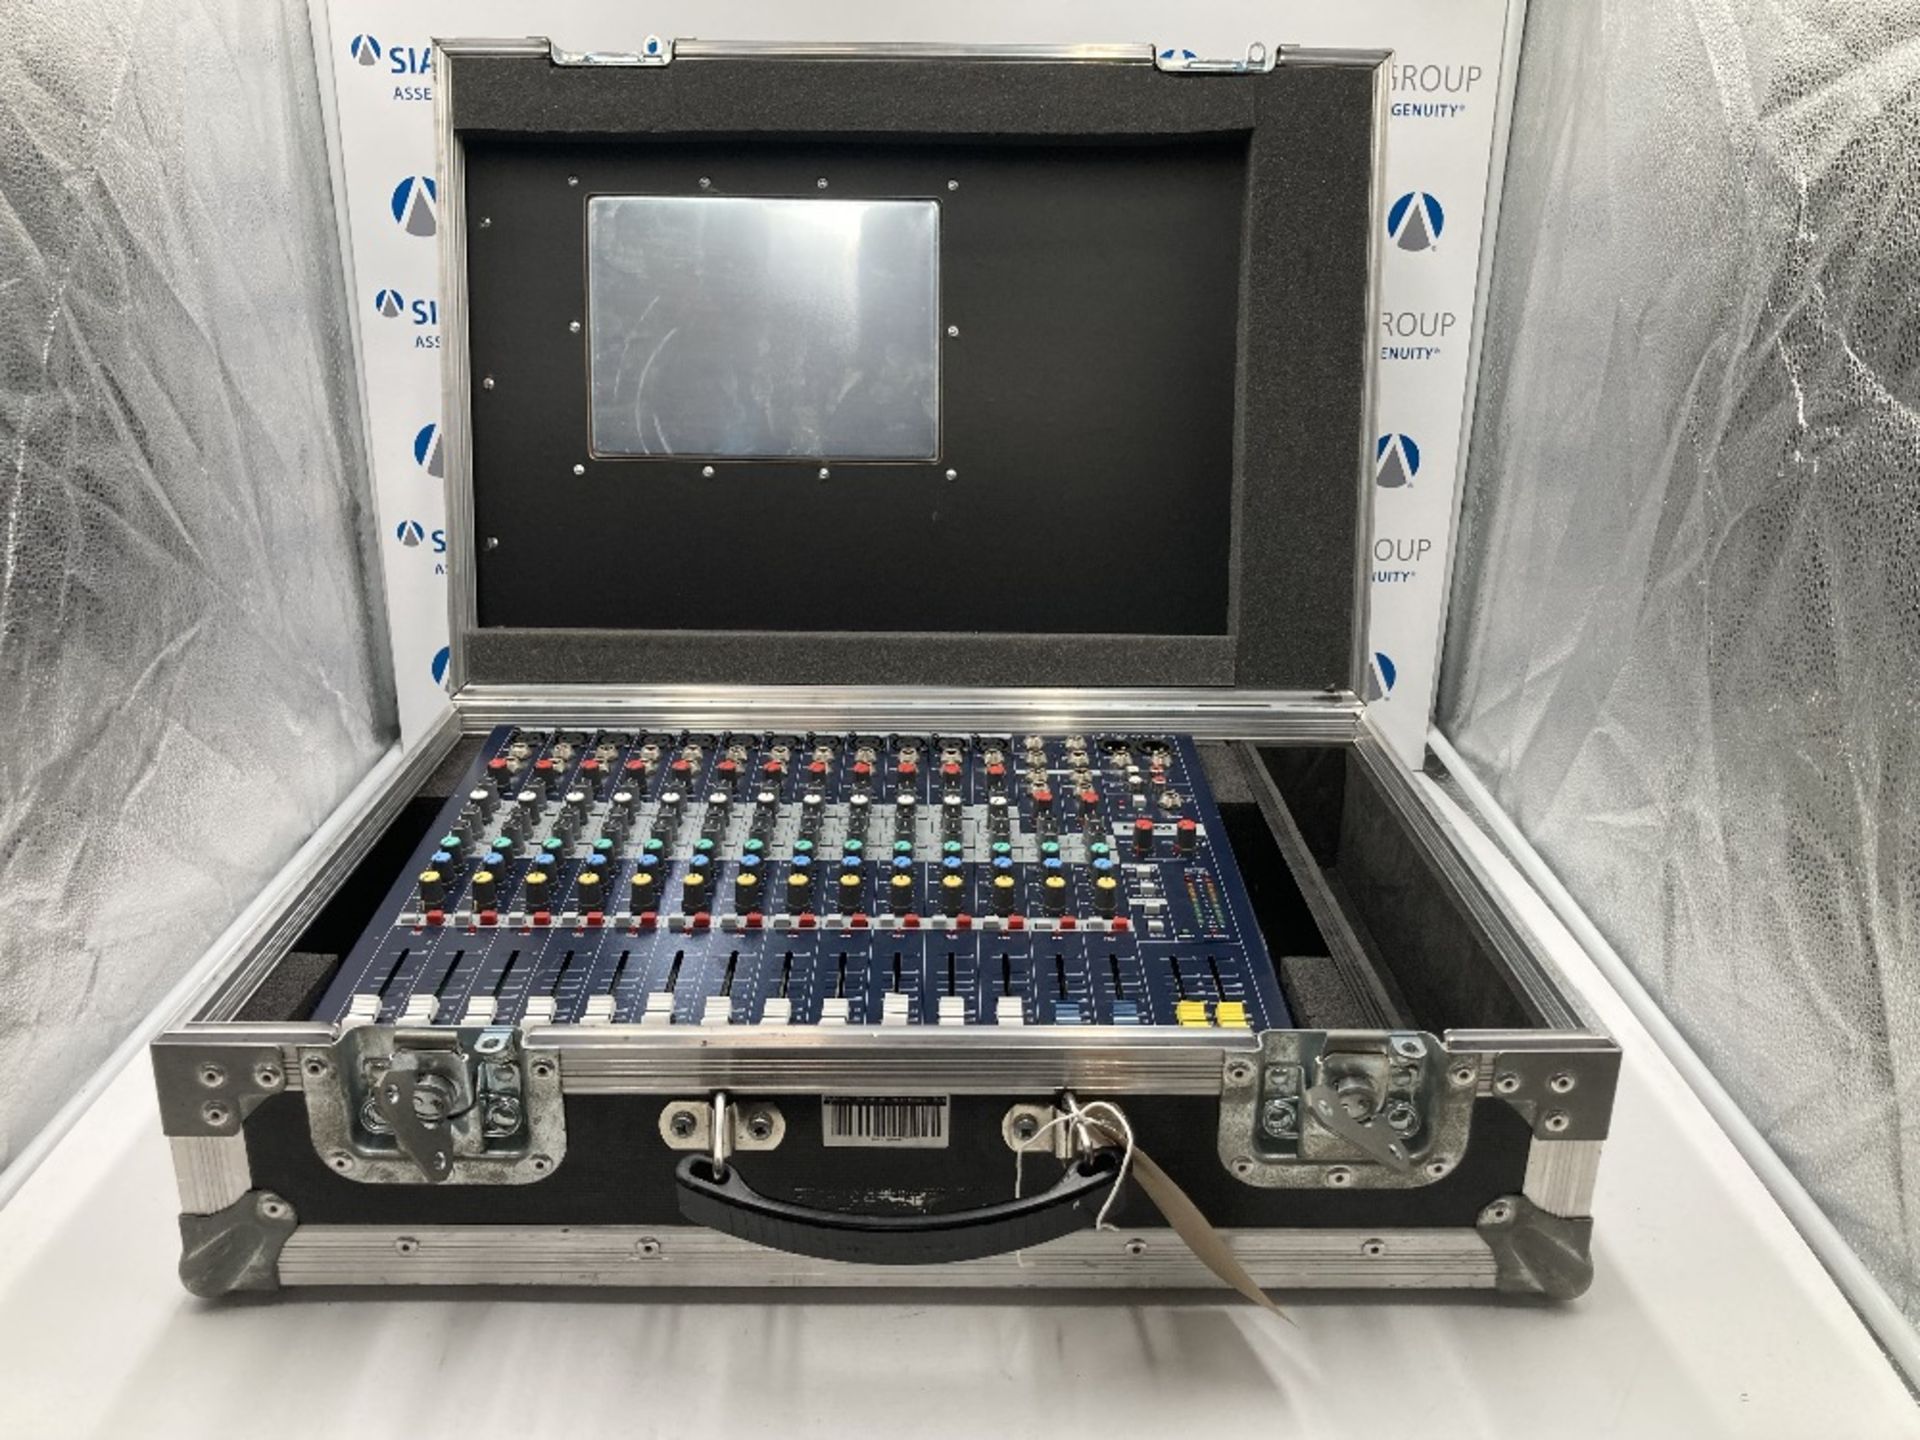 Soundcraft EPM12 Analogue Mixing Console & Heavy Duty Briefcase